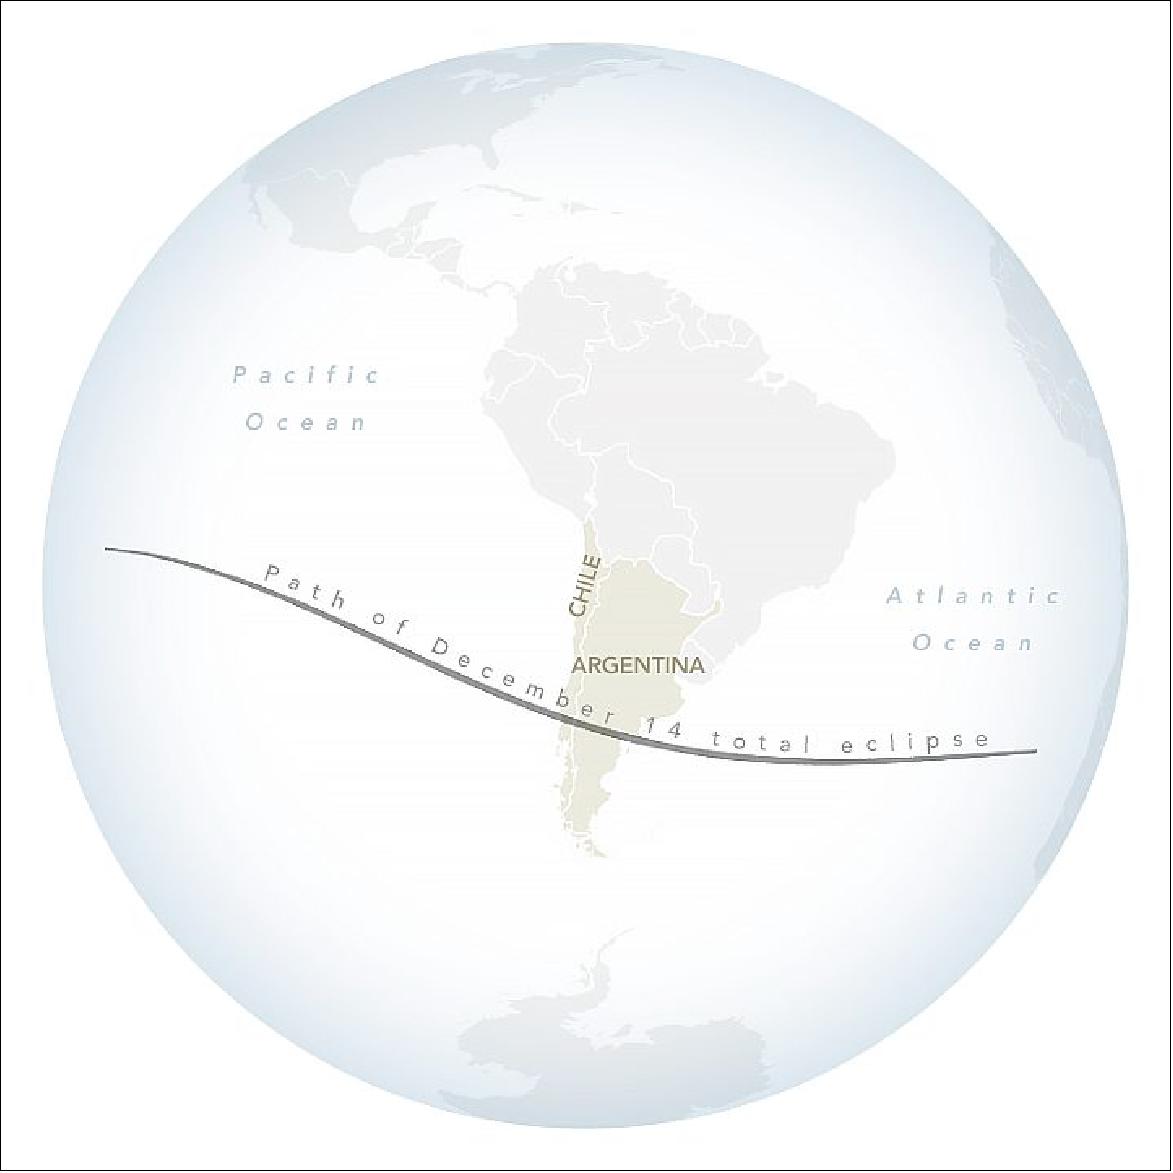 Figure 39: The “path of totality” (umbral path) for the eclipse this week was roughly 90 km (60 miles) wide and passed across South America from Saavedra, Chile, to Salina del Eje, Argentina. However, meteorologist Matthew Cappucci reported that an atmospheric river event caused thick cloud cover over much of the region (image credit: NASA Earth Observatory)